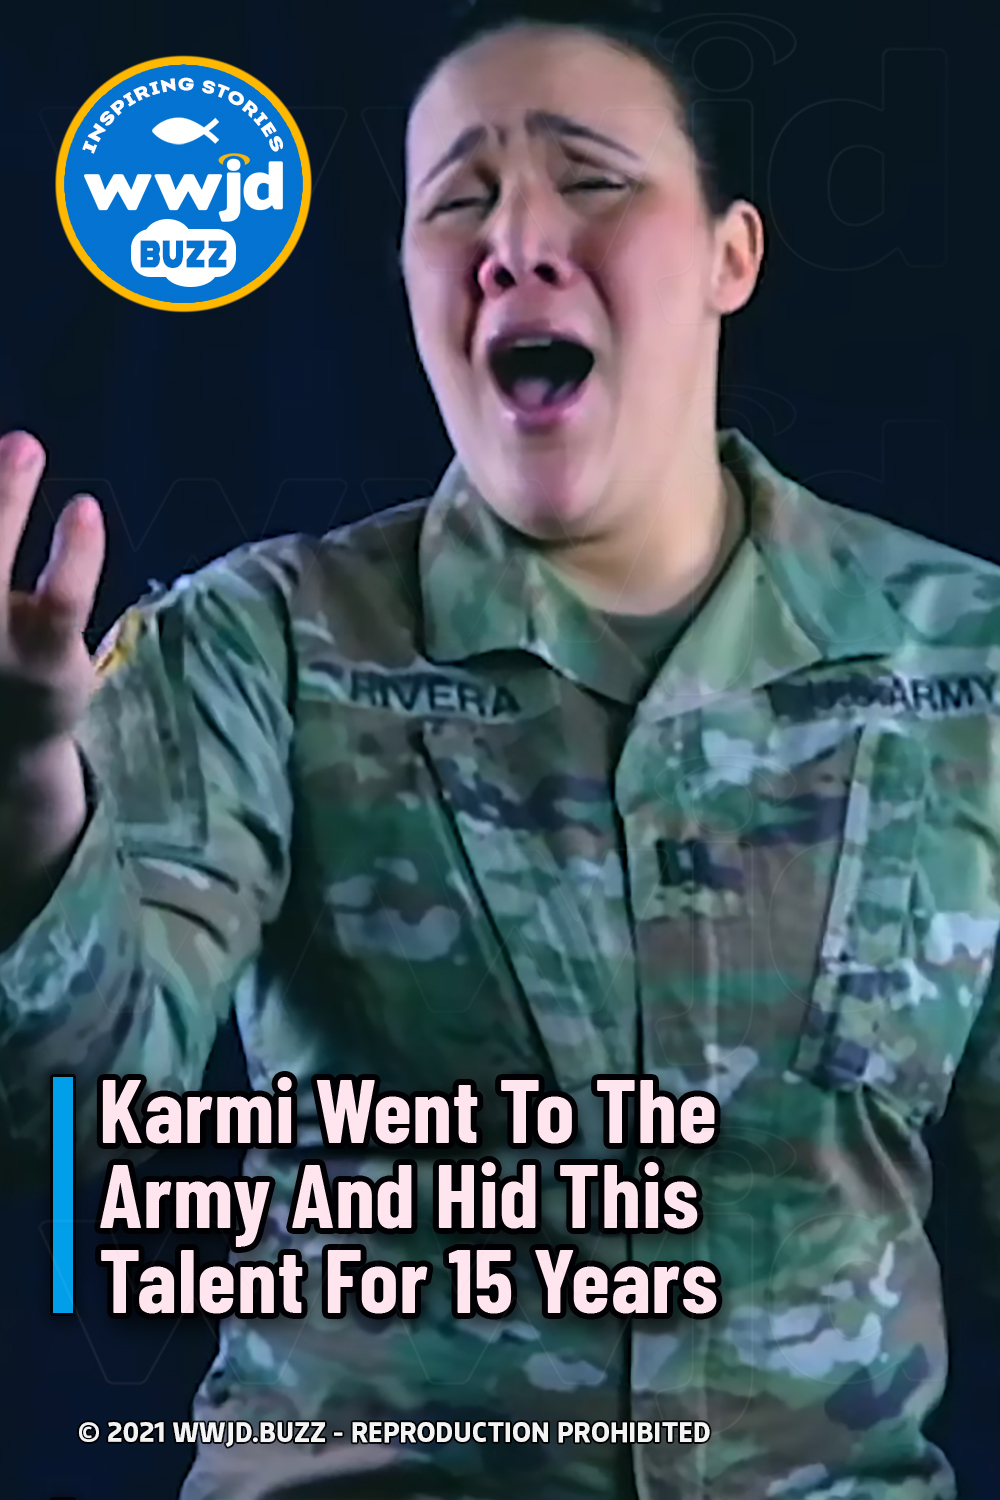 Karmi Went To The Army And Hid This Talent For 15 Years